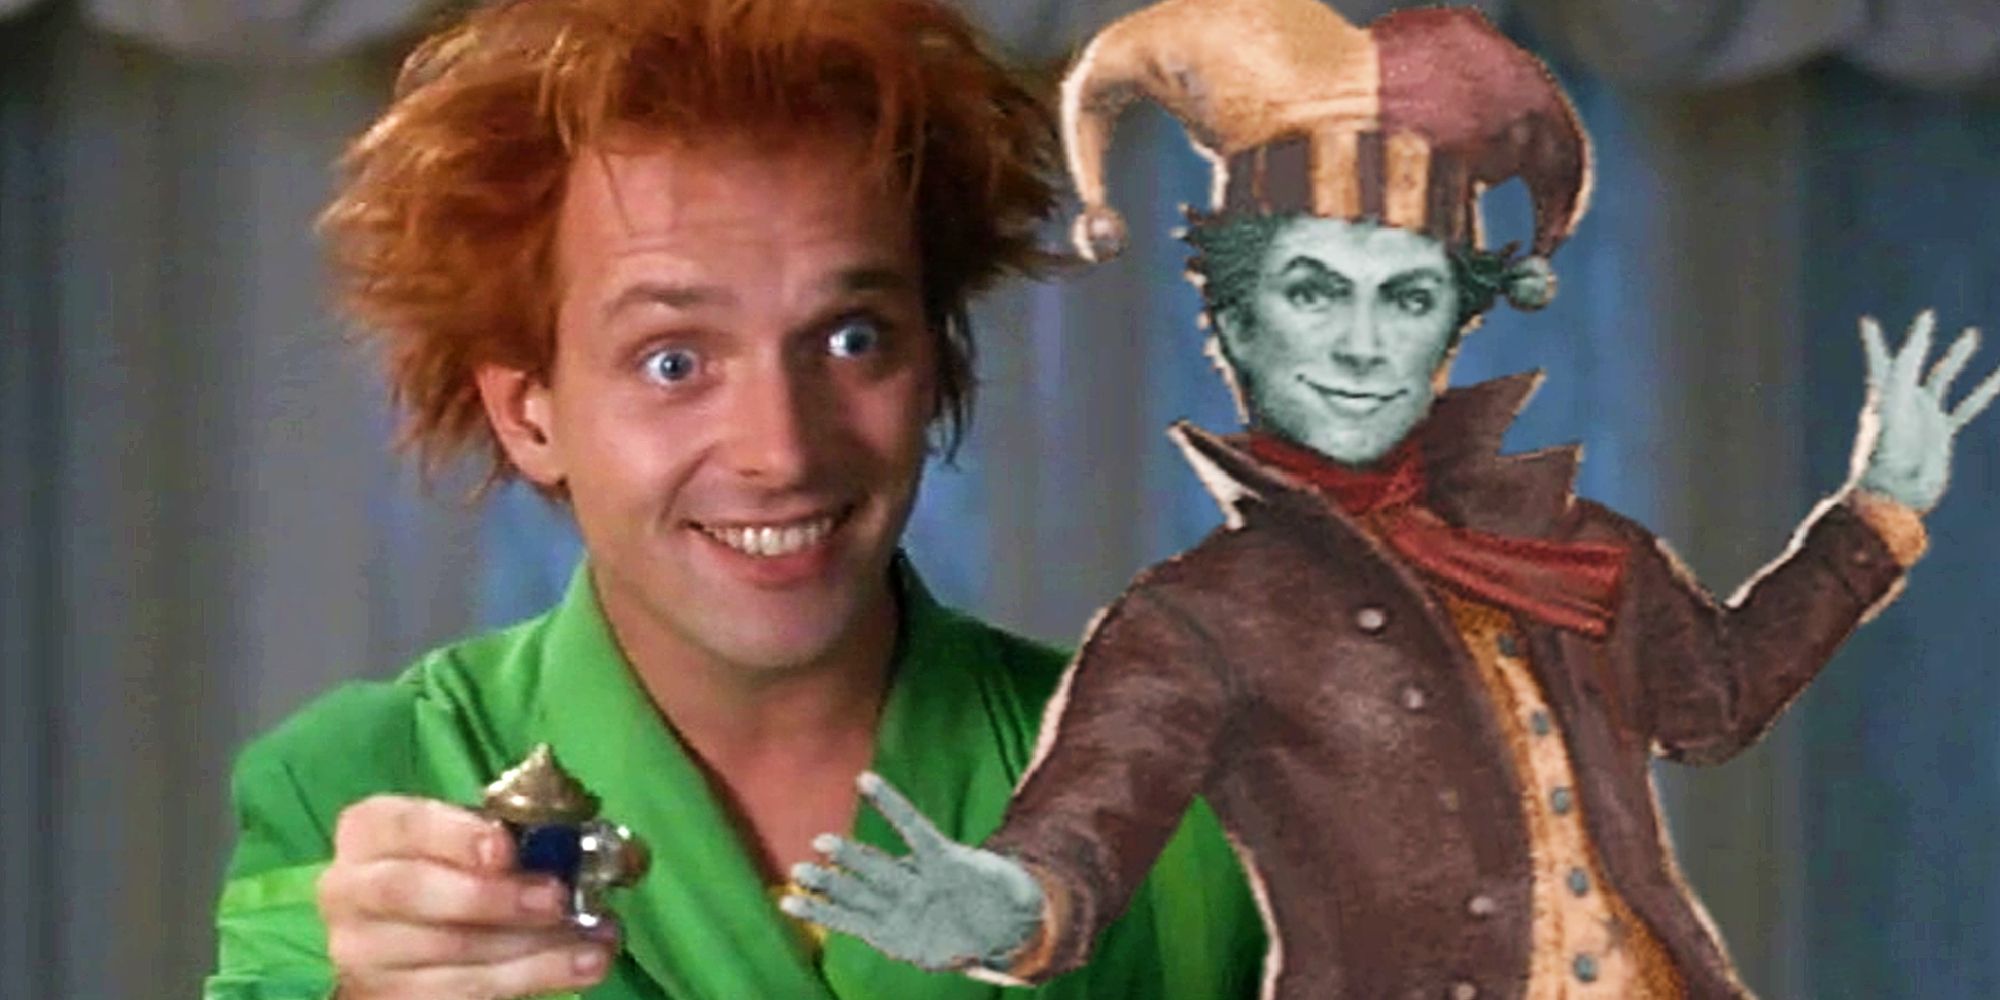 Rik Mayall in Drop Dead Fred and Peeves in Harry Potter